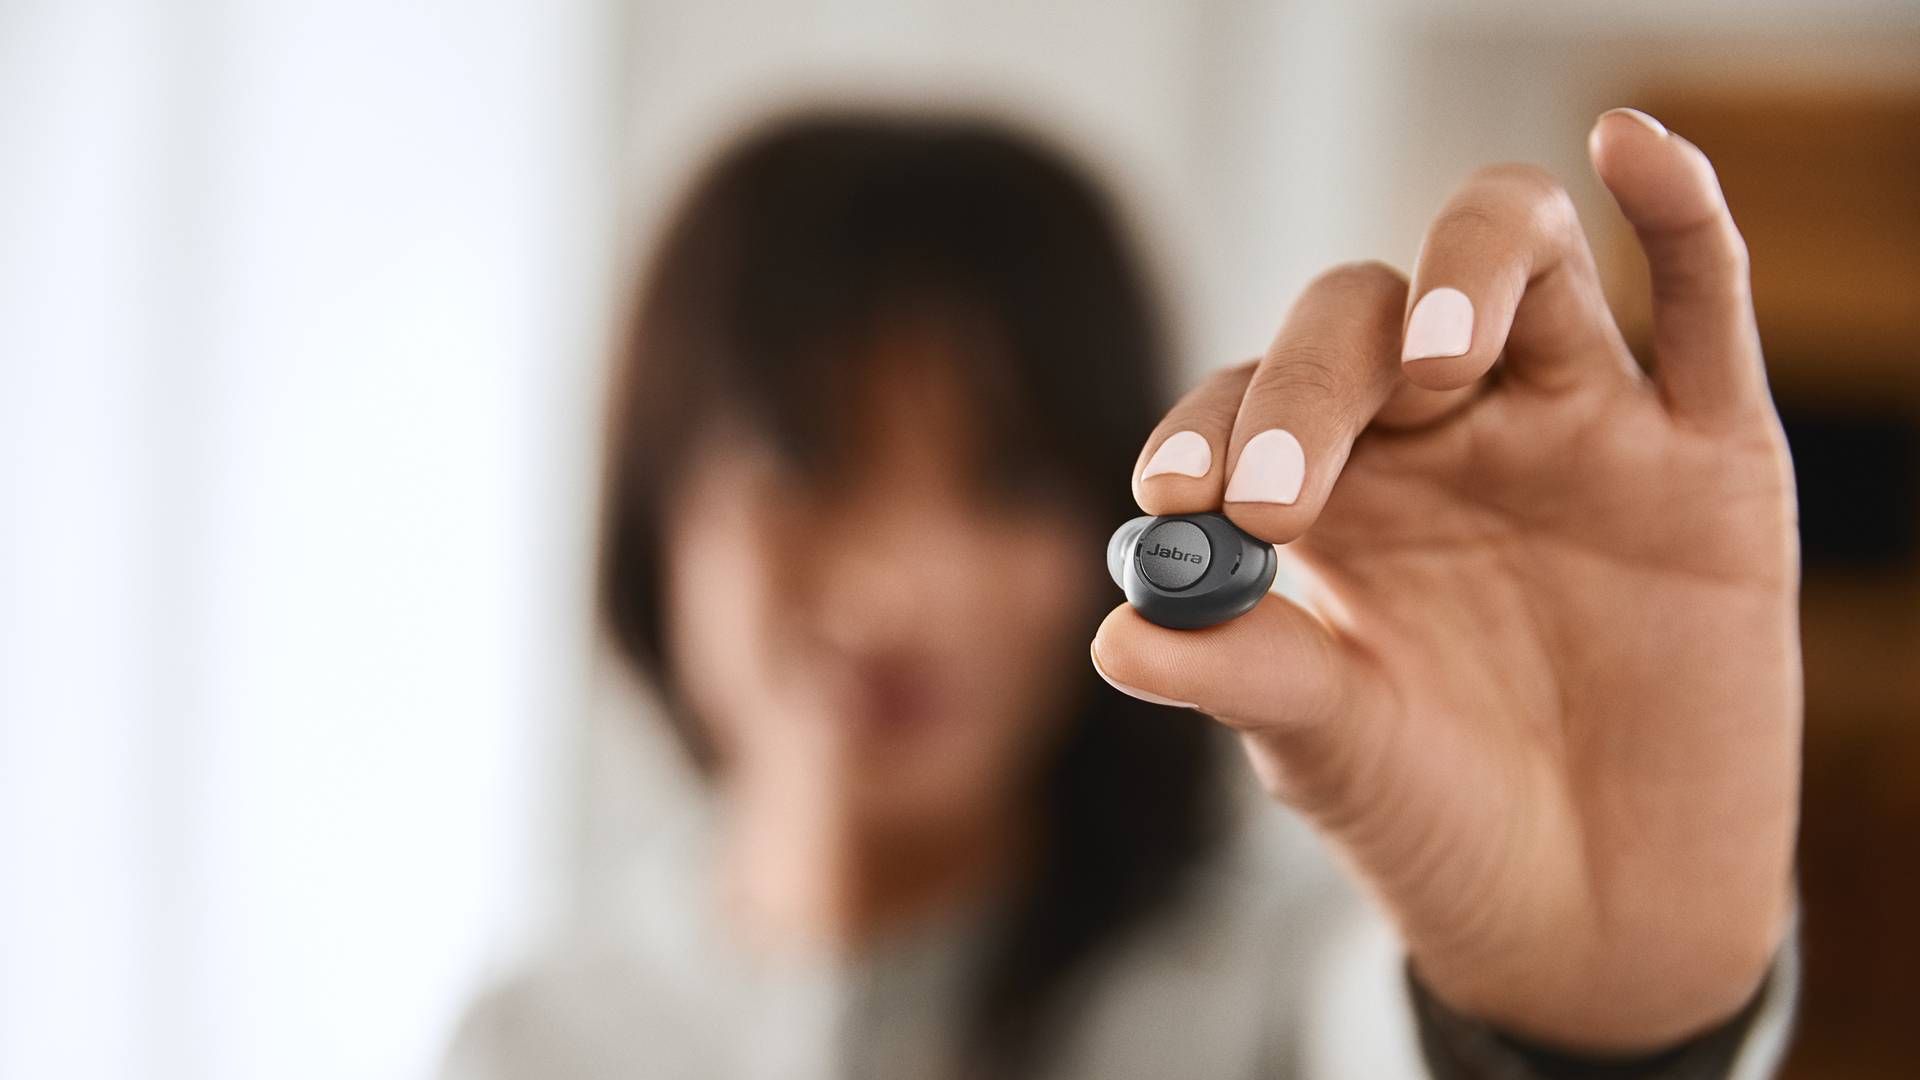 Jabra Enhance Plus combines an earbud from GN Audio with GN Hearing's hearing improving technology | Photo: GN Hearing / PR